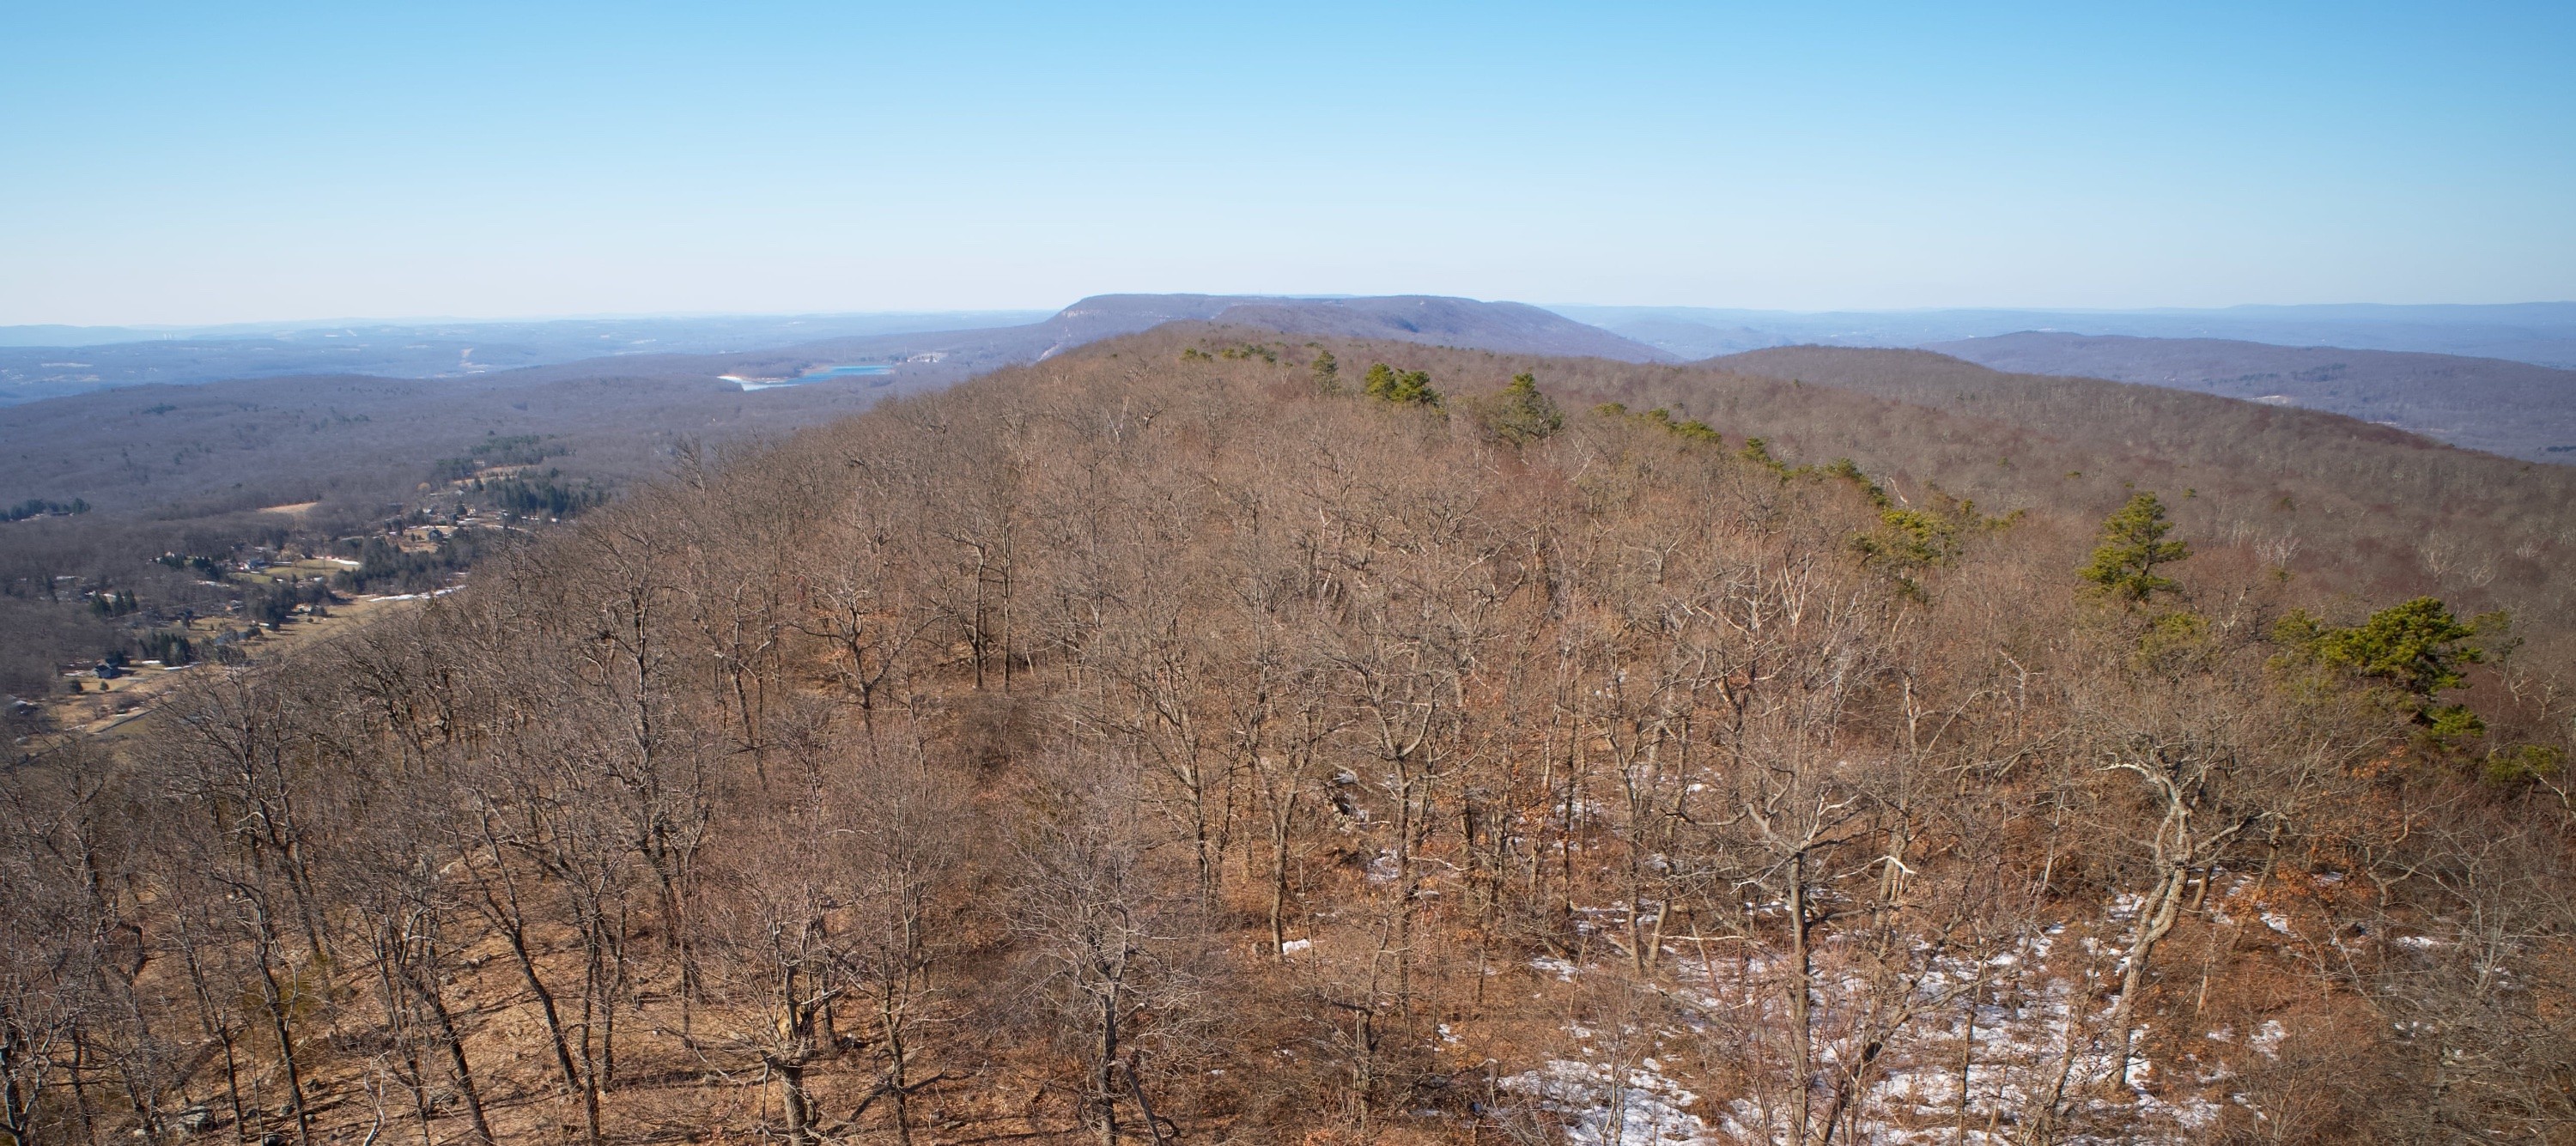 View south from Catfish Fire Tower